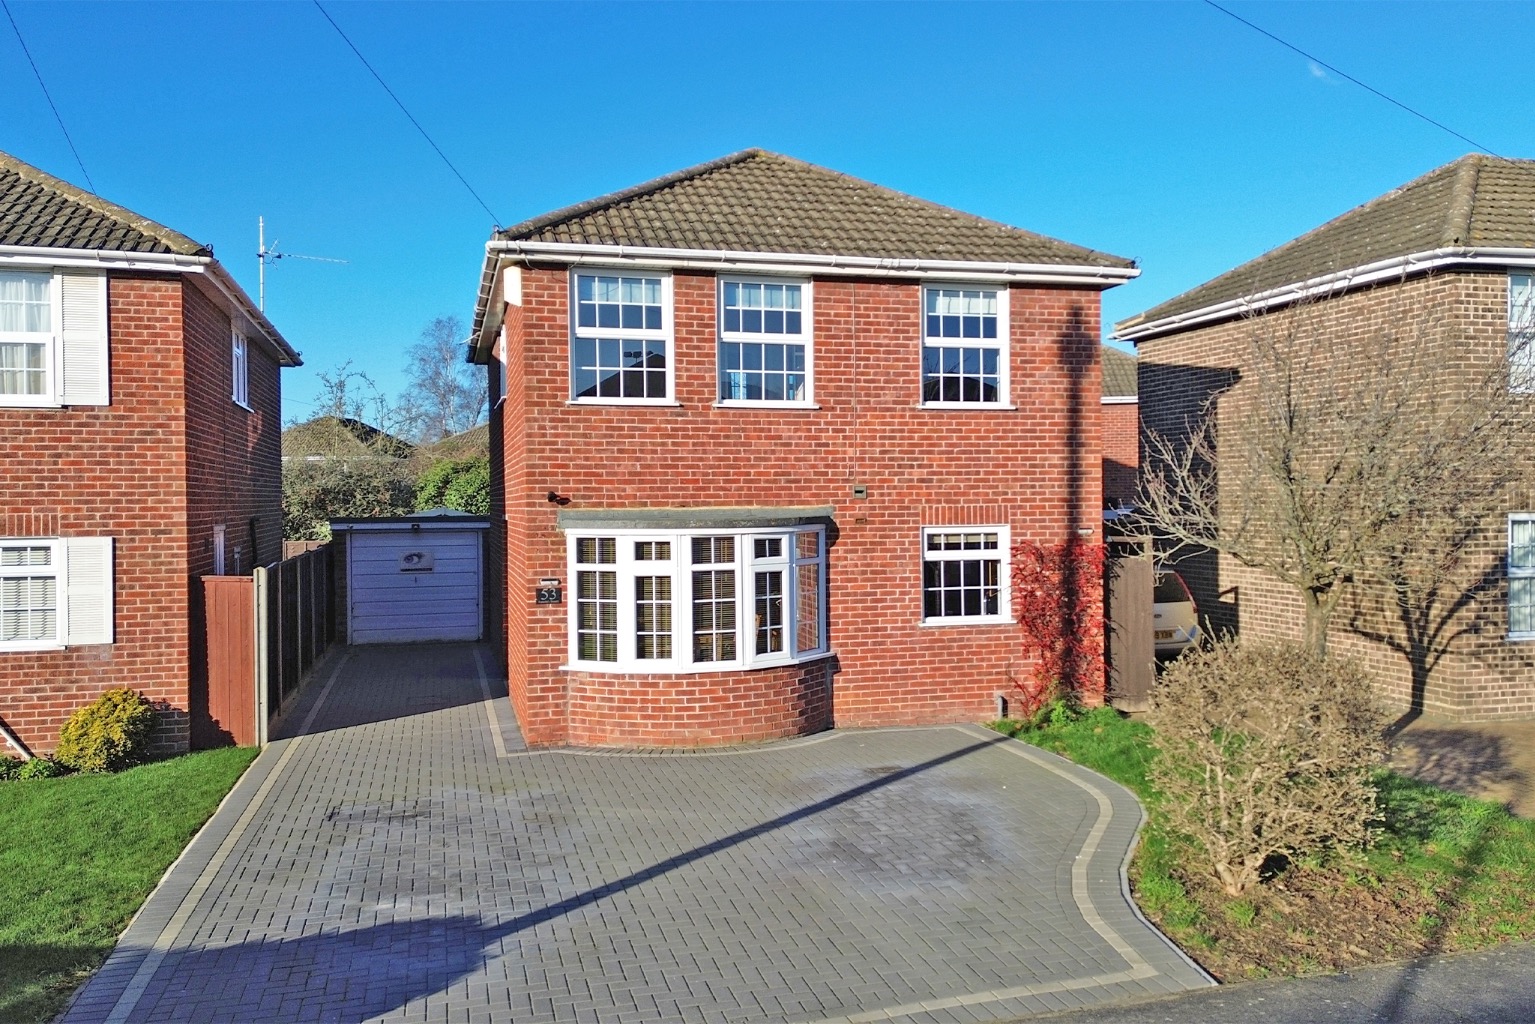 4 bed detached house for sale in Barn Drive, Maidenhead  - Property Image 1